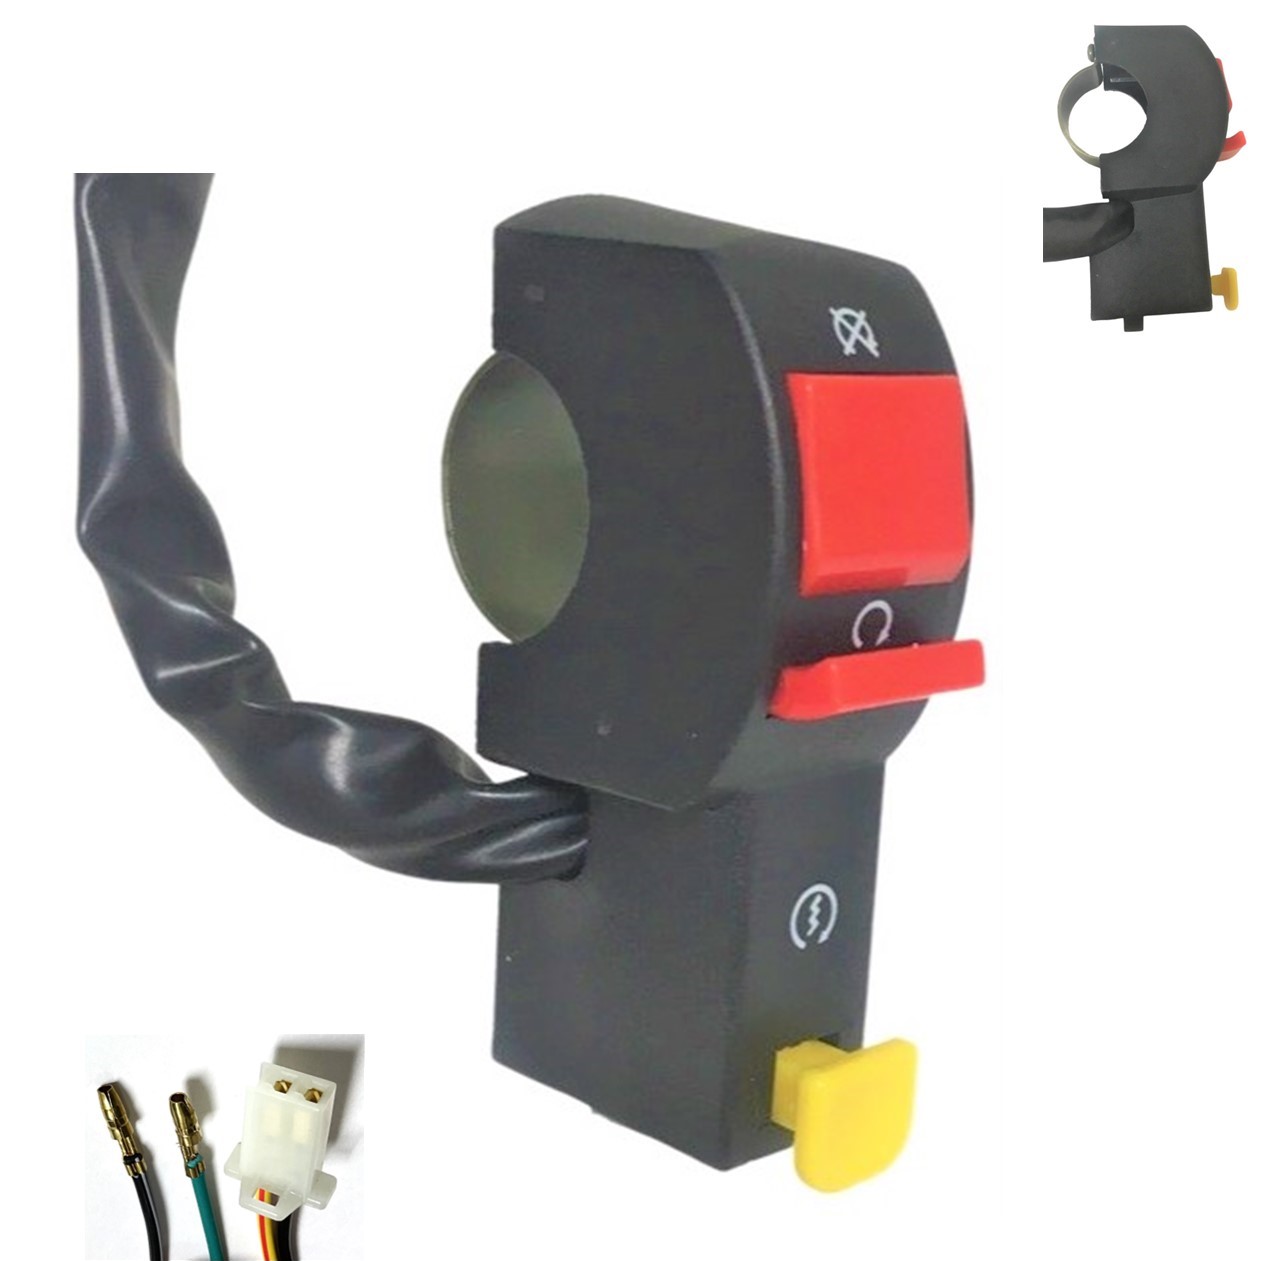 Start Kill On Off Switch 2 Pin Female Jack + 2 Wires Fits Many ATVs & DirtBikes - Click Image to Close